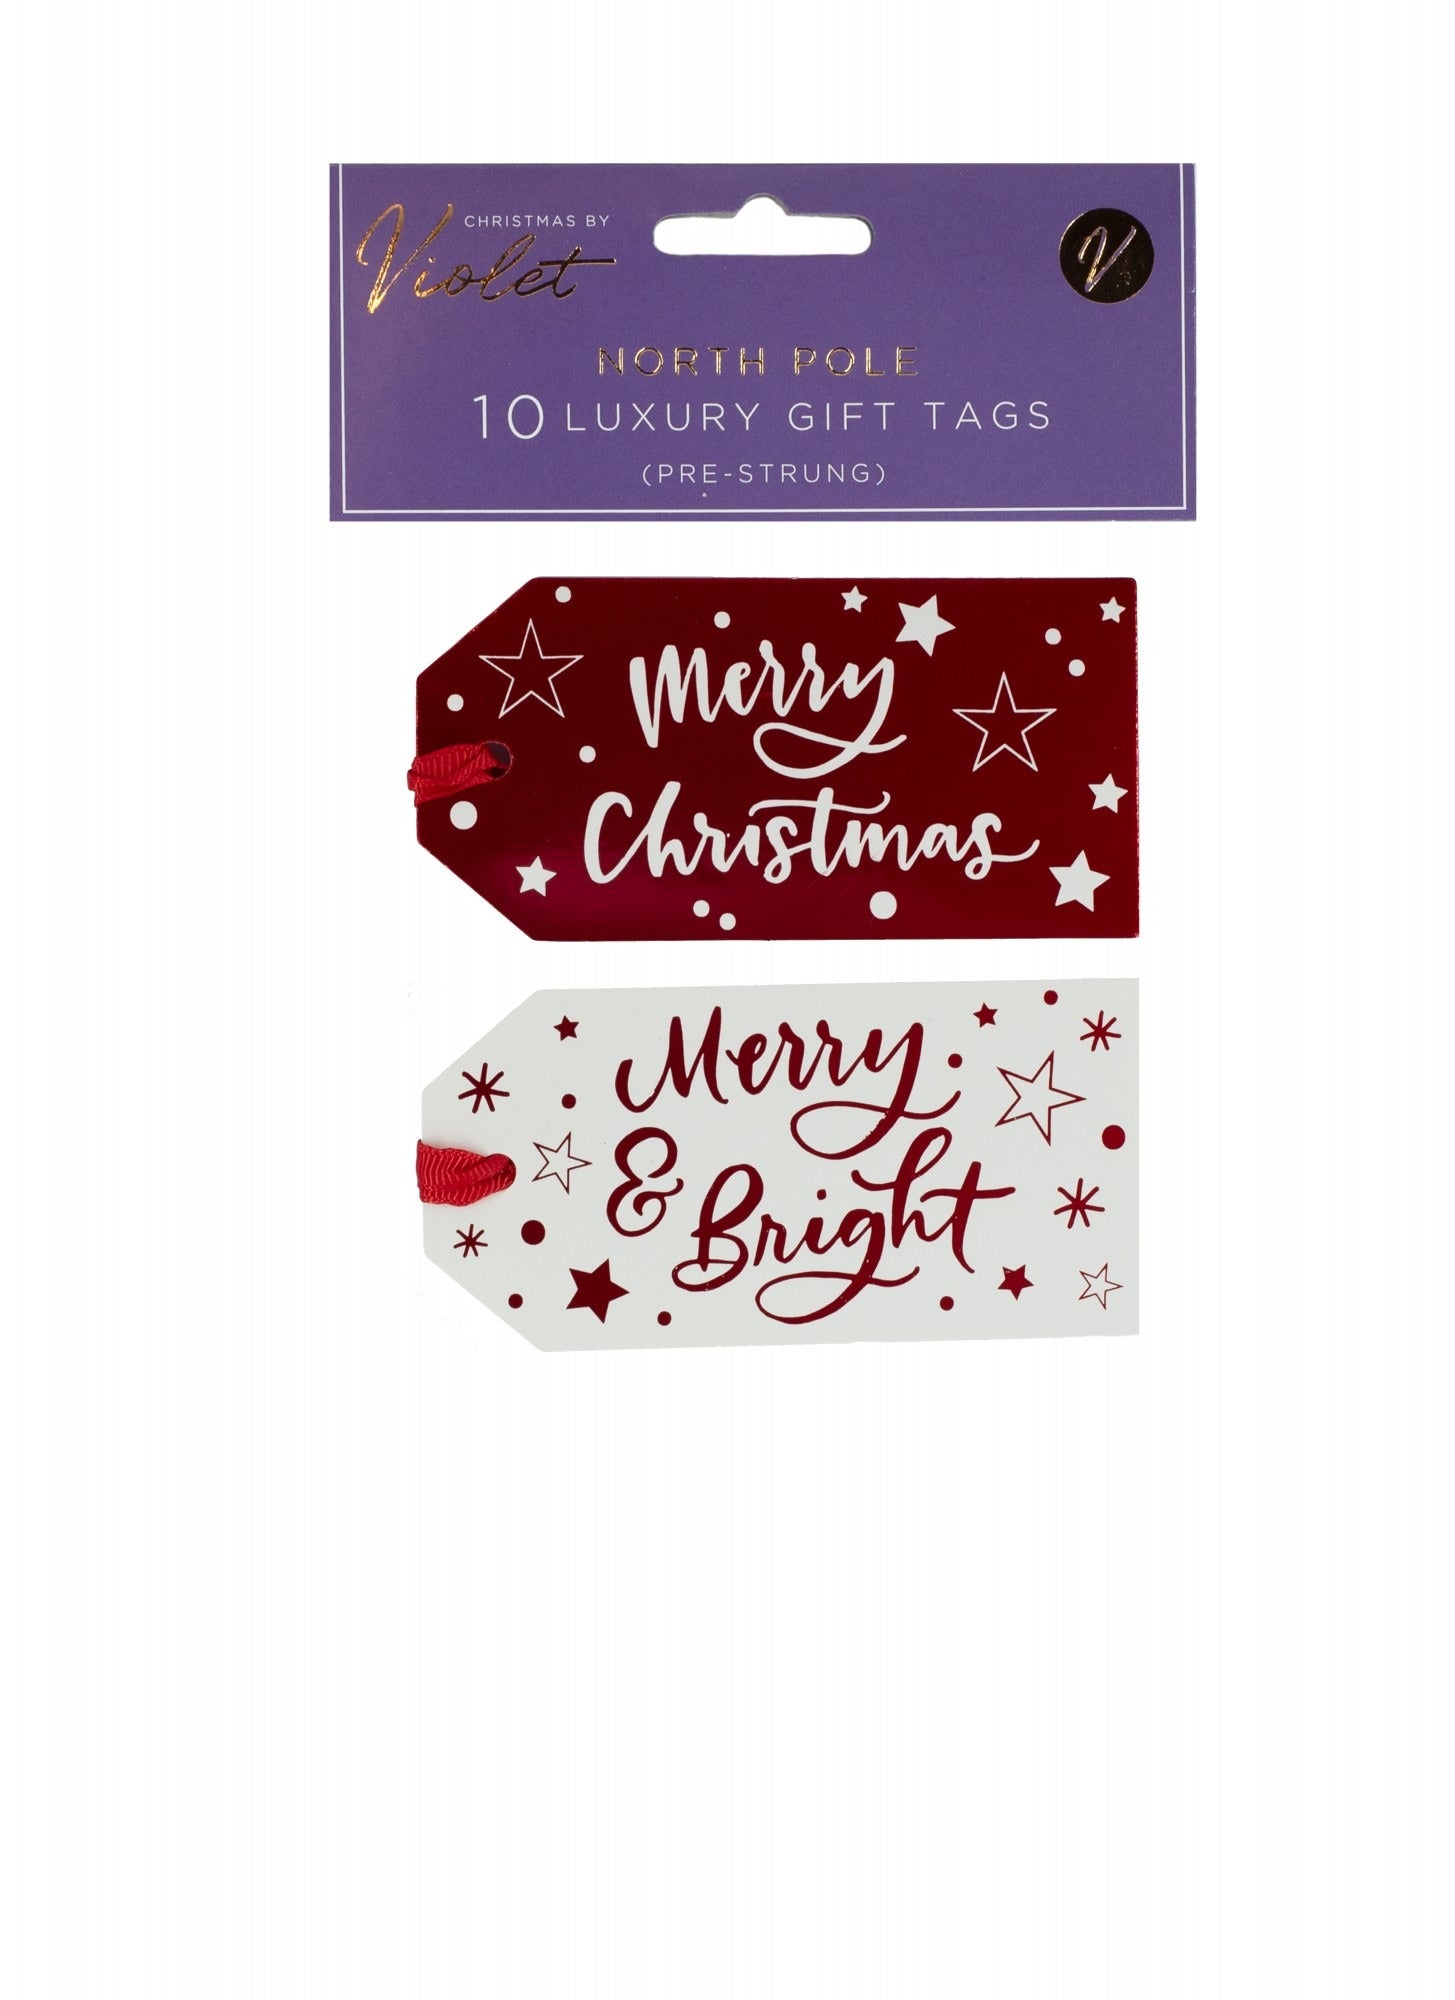 View Warm Wishes Gift Tags x10 information